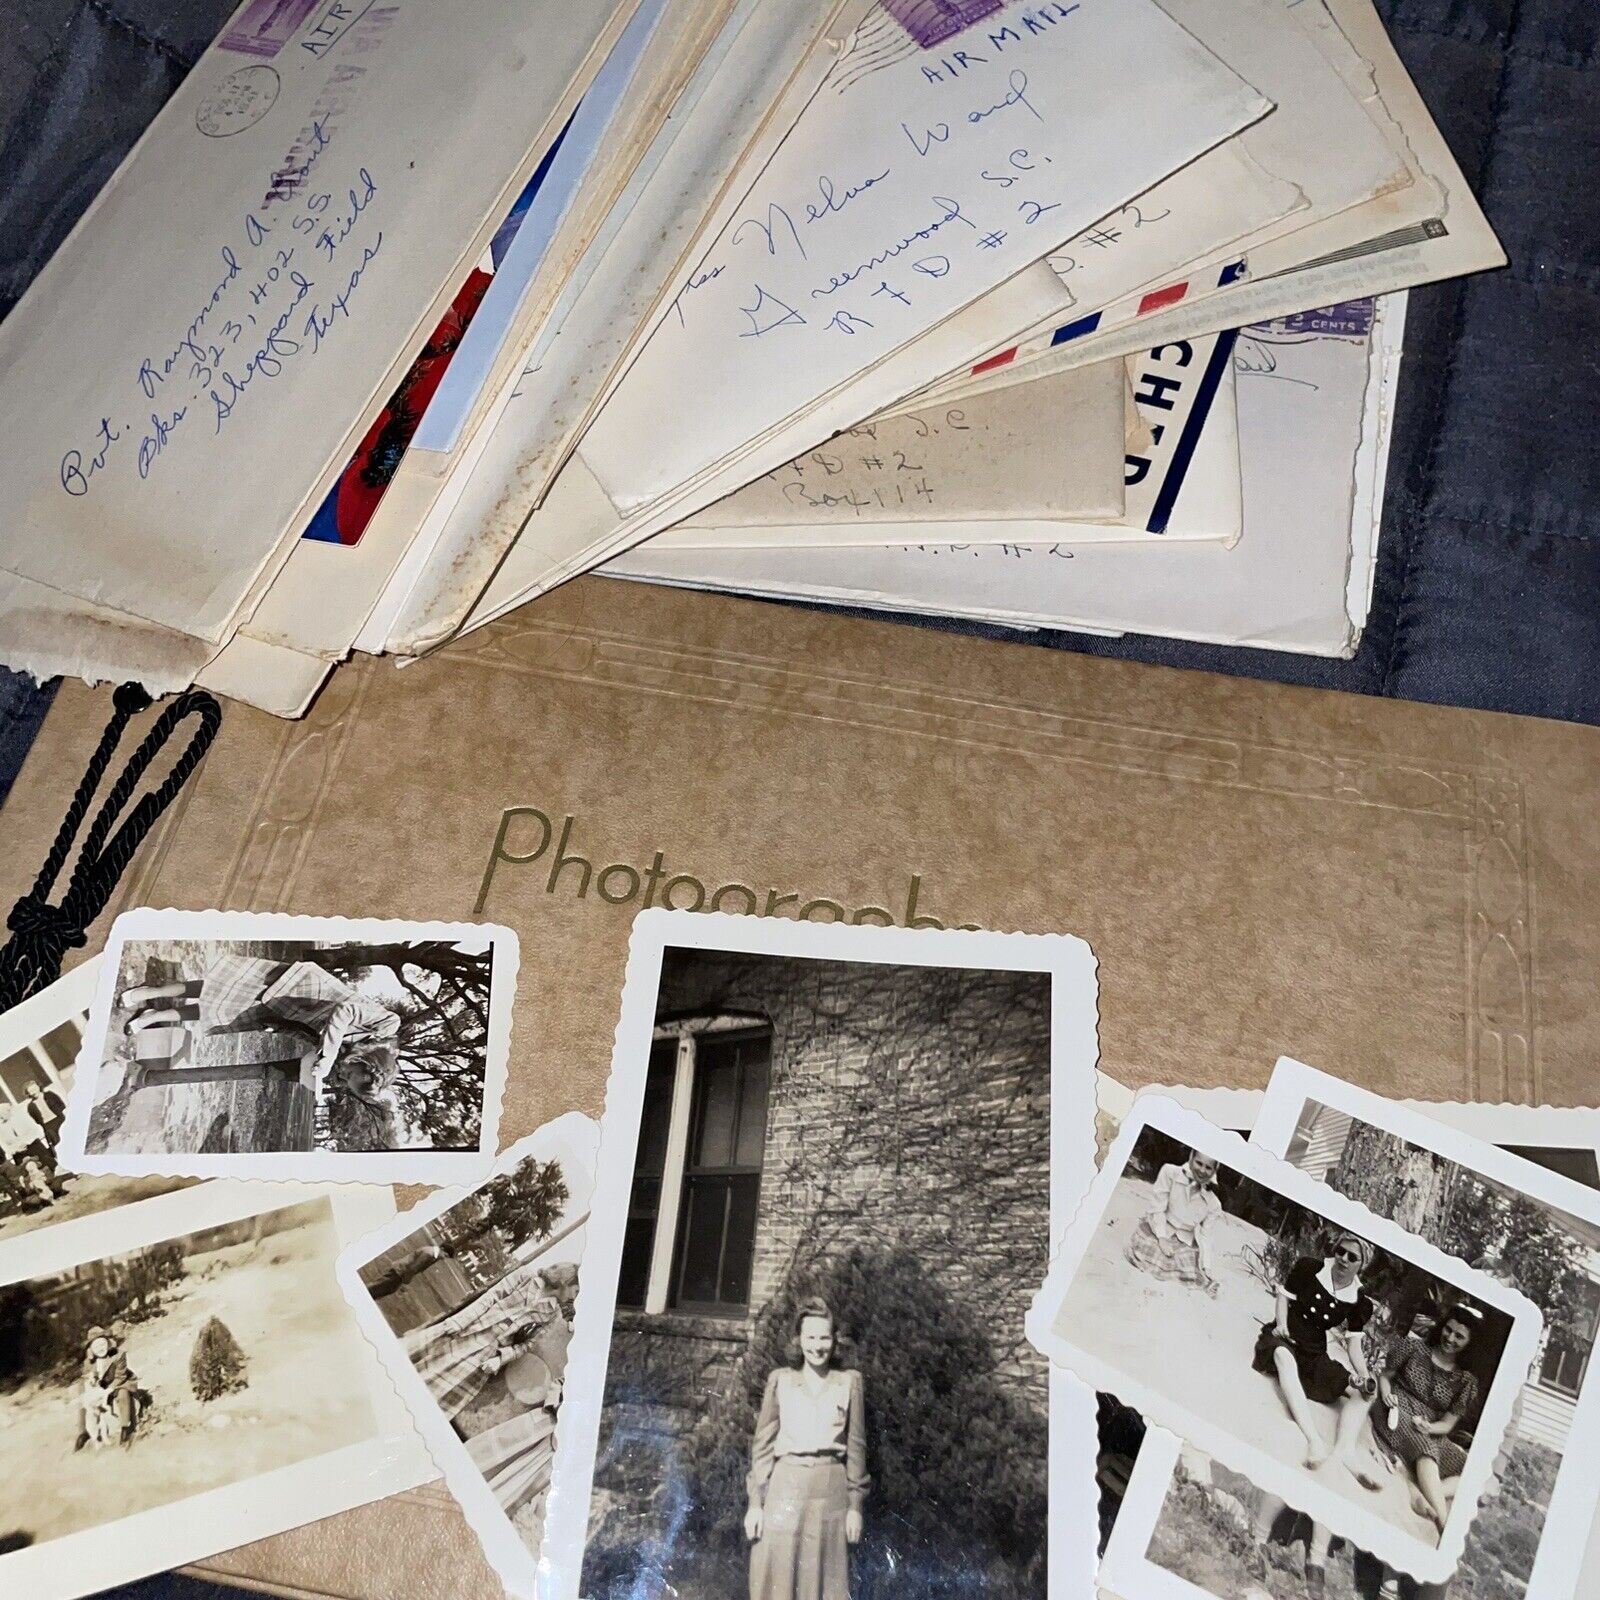 VTG LOT 35 Ww2 Letters Between Mopsie/Popsie 12 Photos And Album They Were In